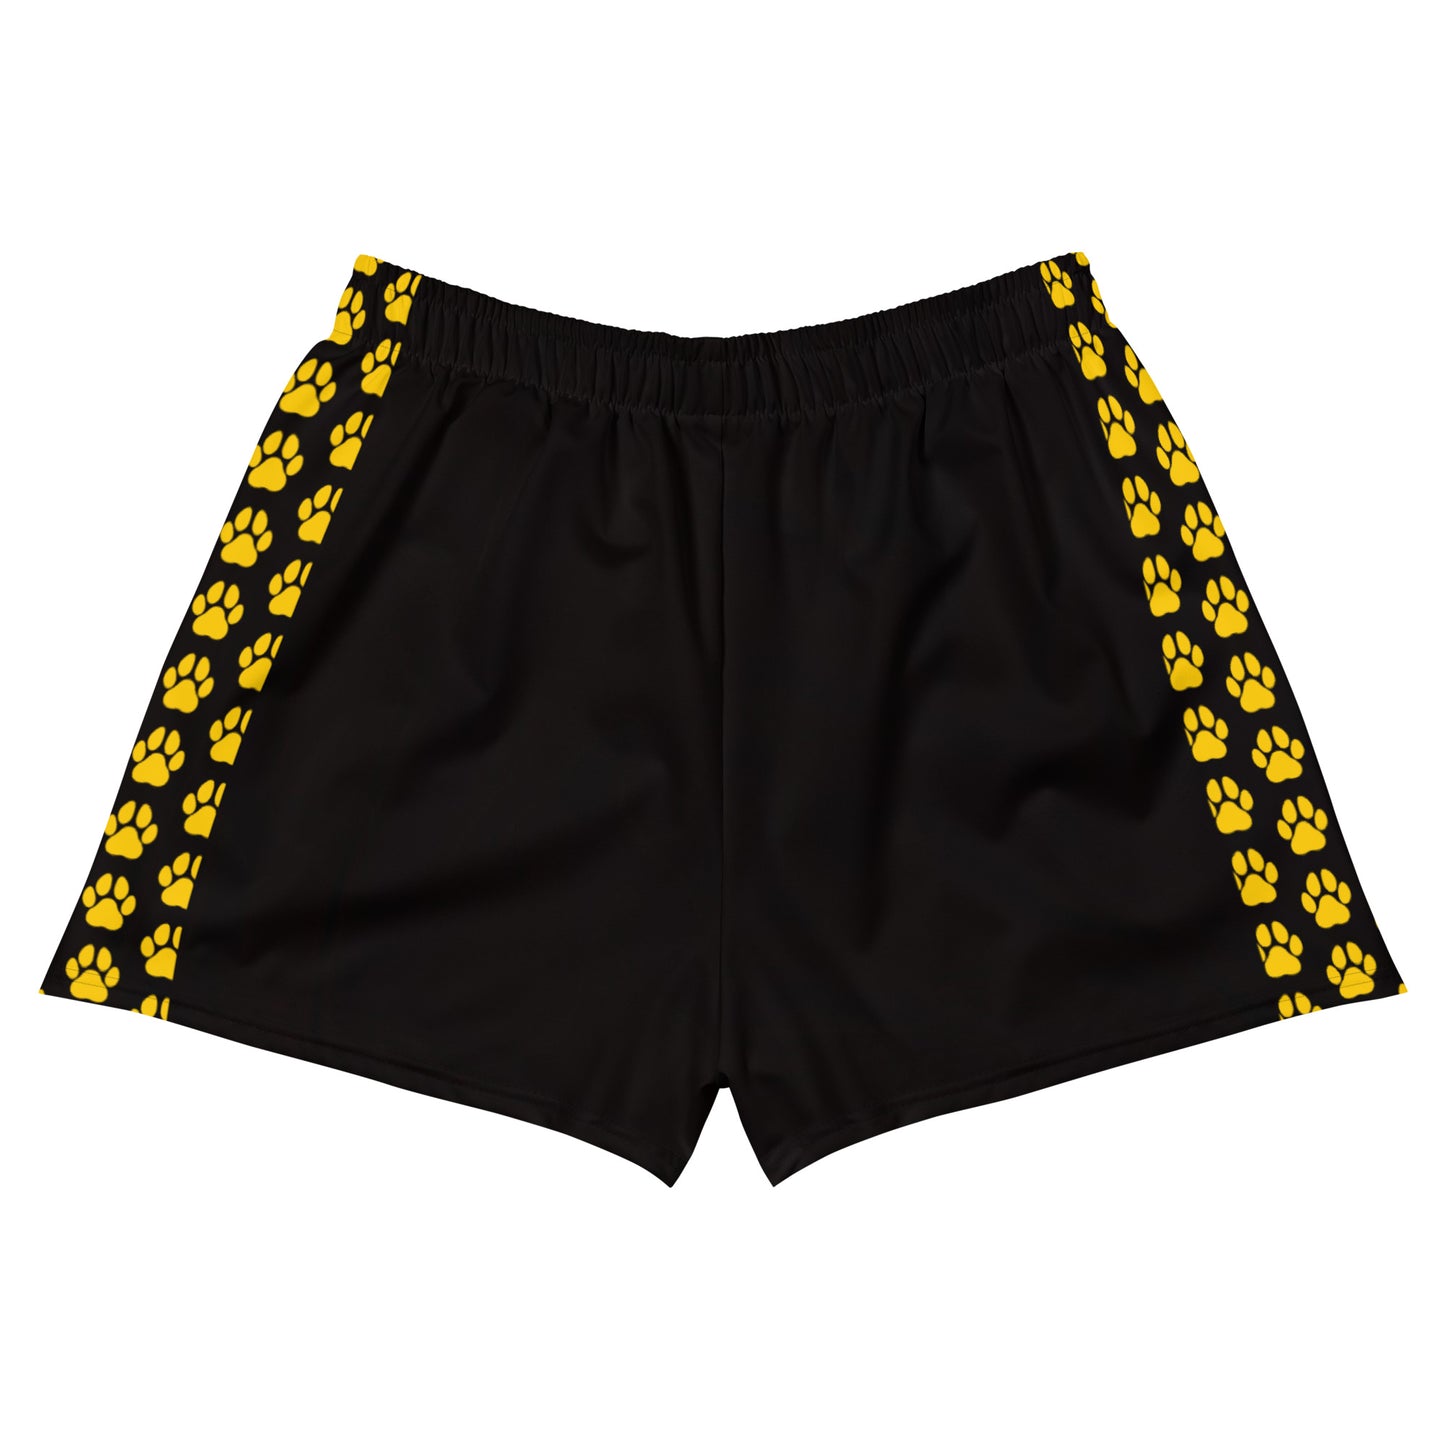 Blacked Out Dawg Trax - Women’s Athletic Shorts